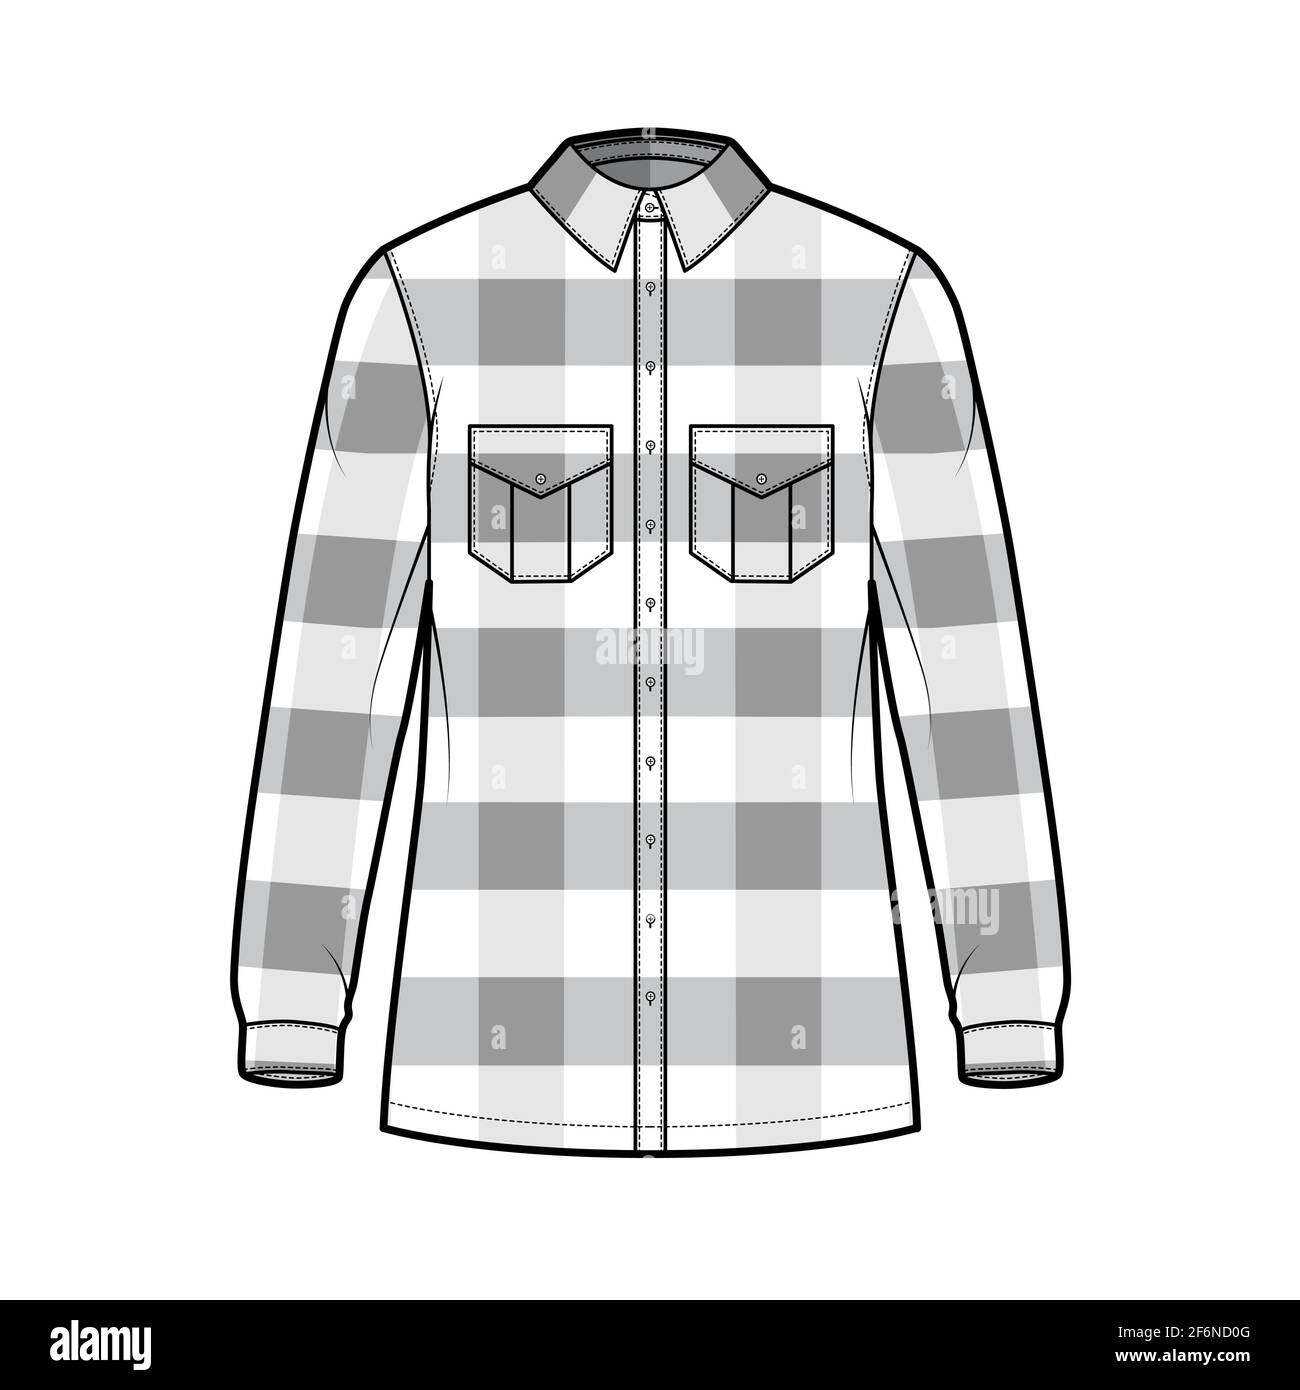 Lumber jacket technical fashion illustration with Buffalo Check motif, oversized body, button closure, classic collar, long sleeves. Flat apparel front, white color style. Women, men unisex CAD mockup Stock Vector